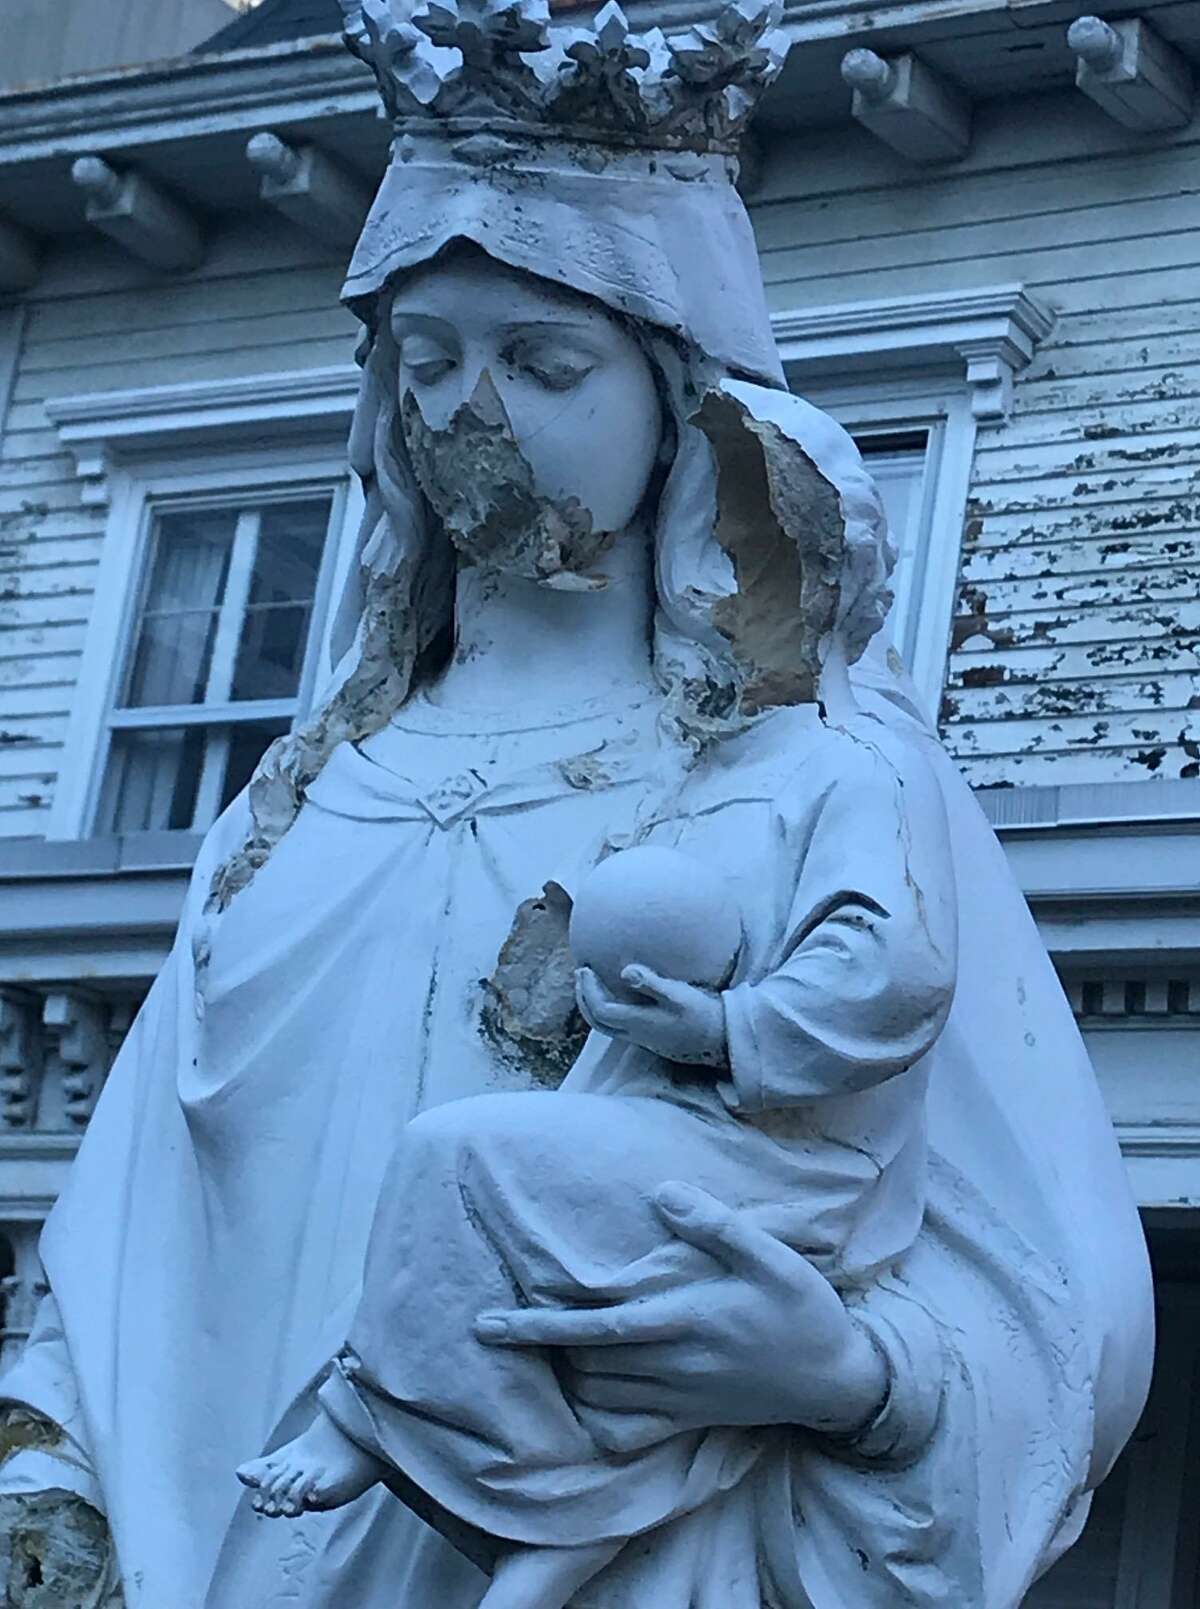 A statue of the Virgin Mary and baby Jesus was vandalized outside the Basilica of St. John the Evangelist on Atlantic Street in downtown Stamford over the weekend.